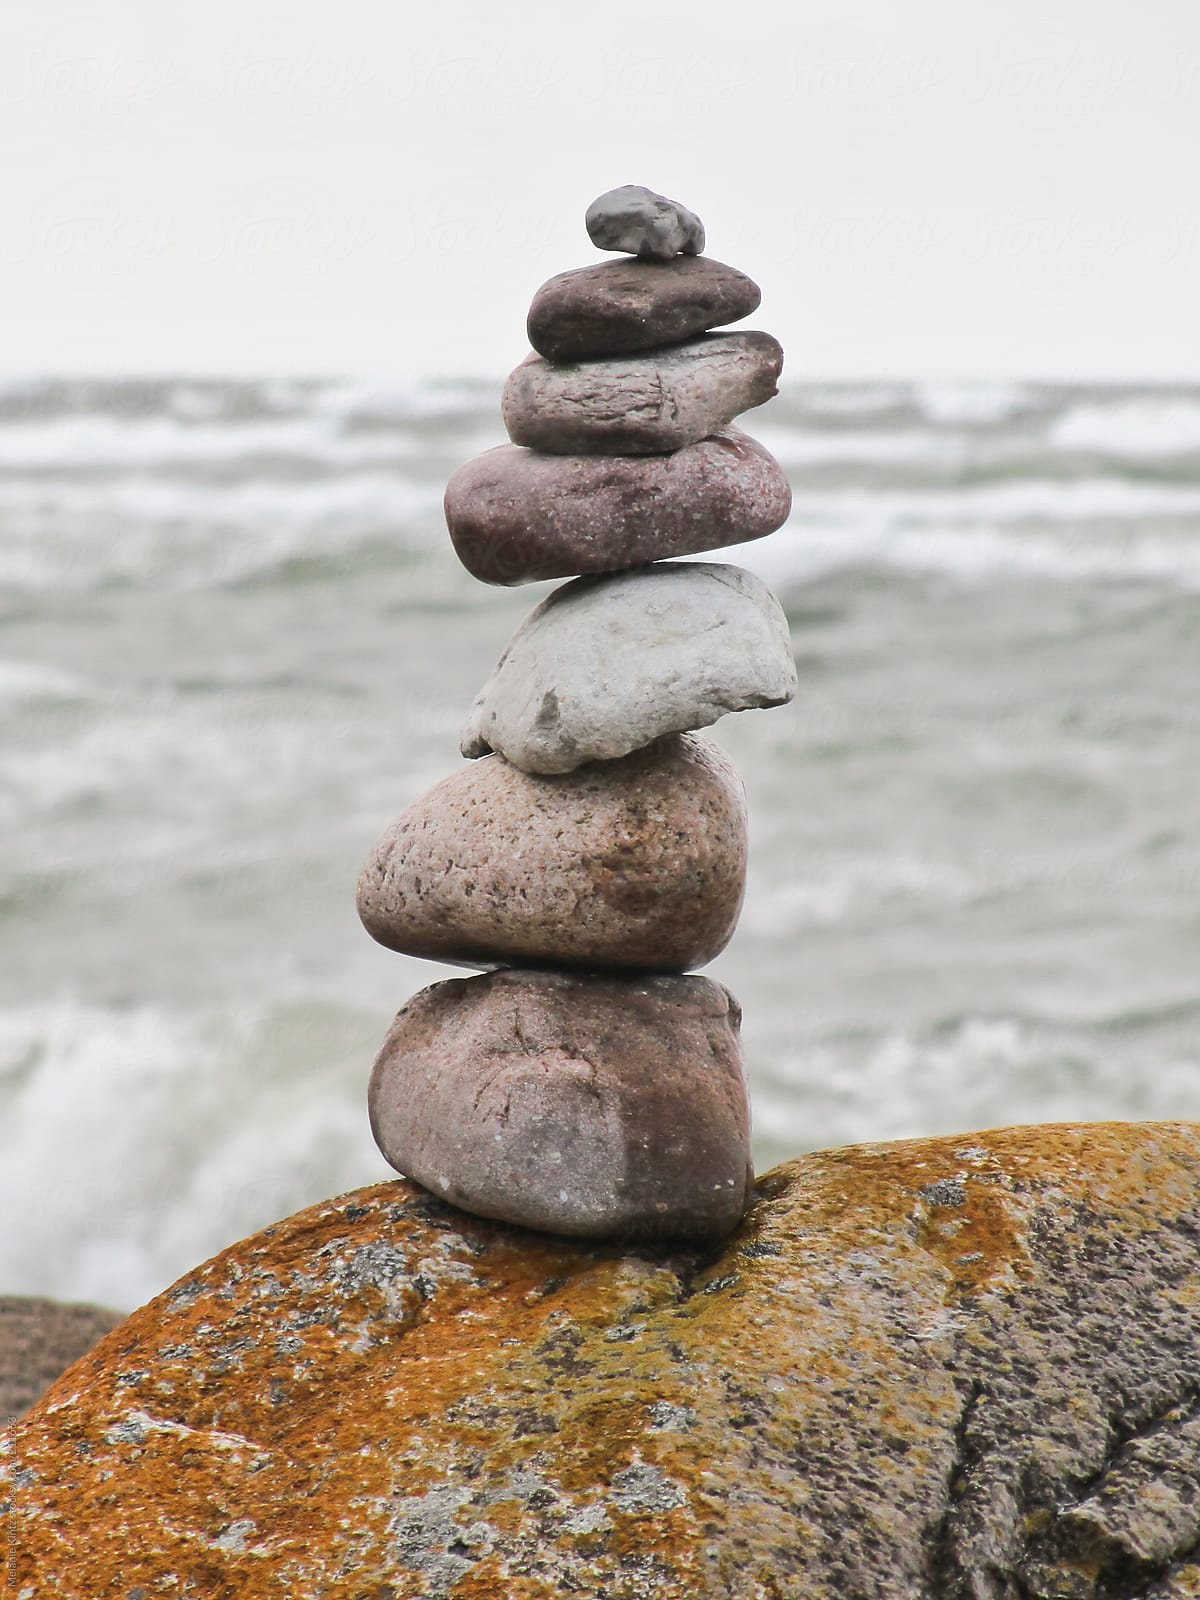 Pile of rocks balanced on a beach before stormy sea